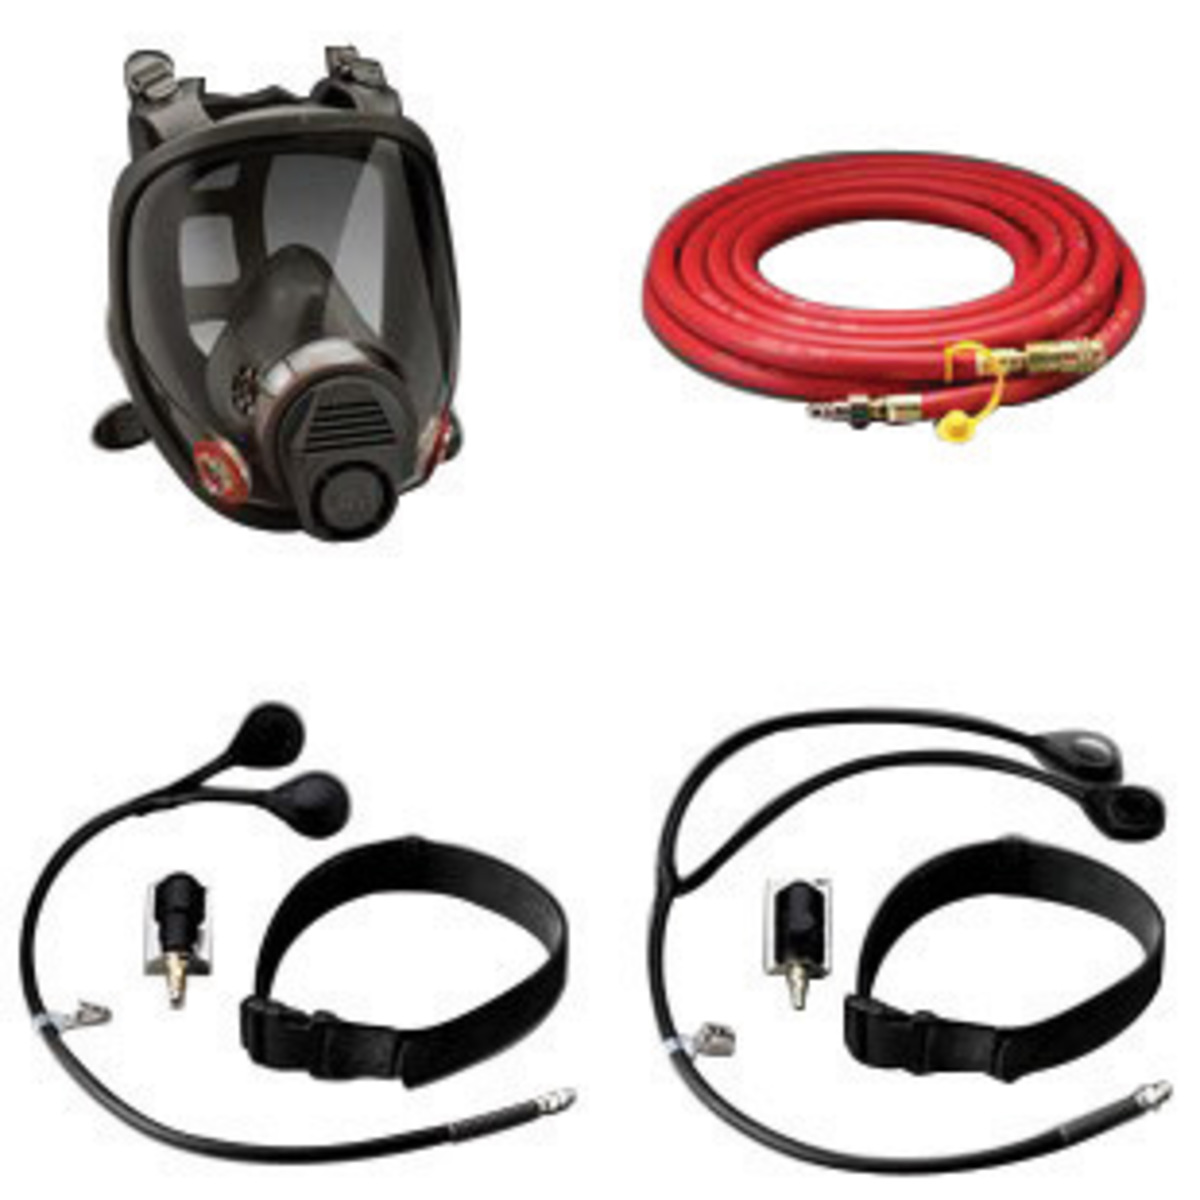 3M™ Low Pressure Black Dual Airline Adapter Kit With SA1500-Breathing Tube And SA1027-Connector Assembly